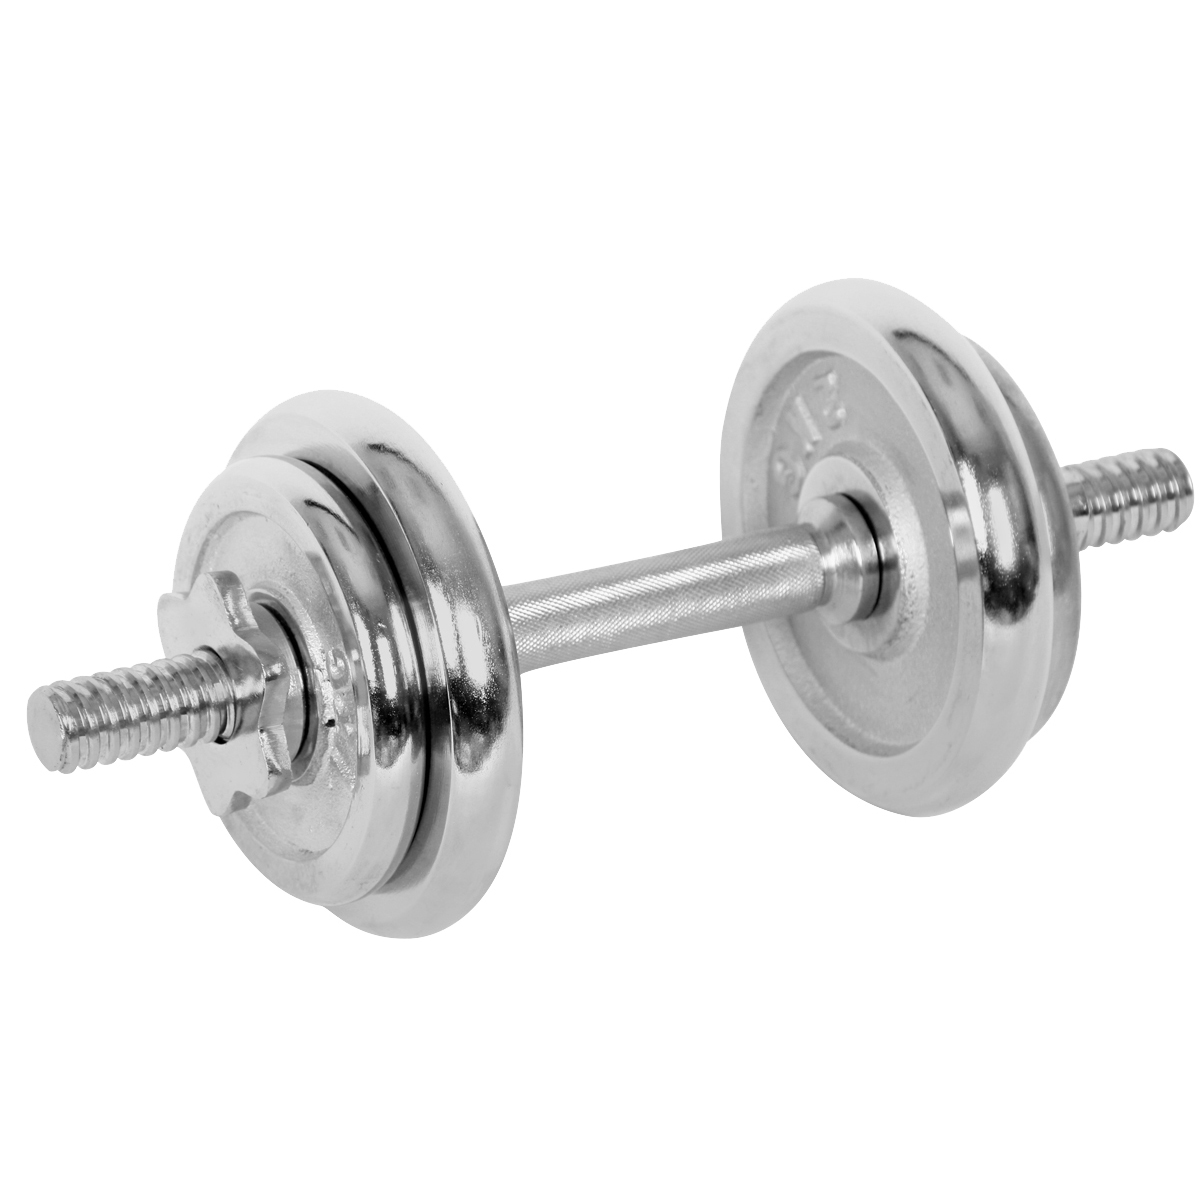 ONE-HAND WEIGHT 7.5 kg CHROME - One-hand adjustable weight